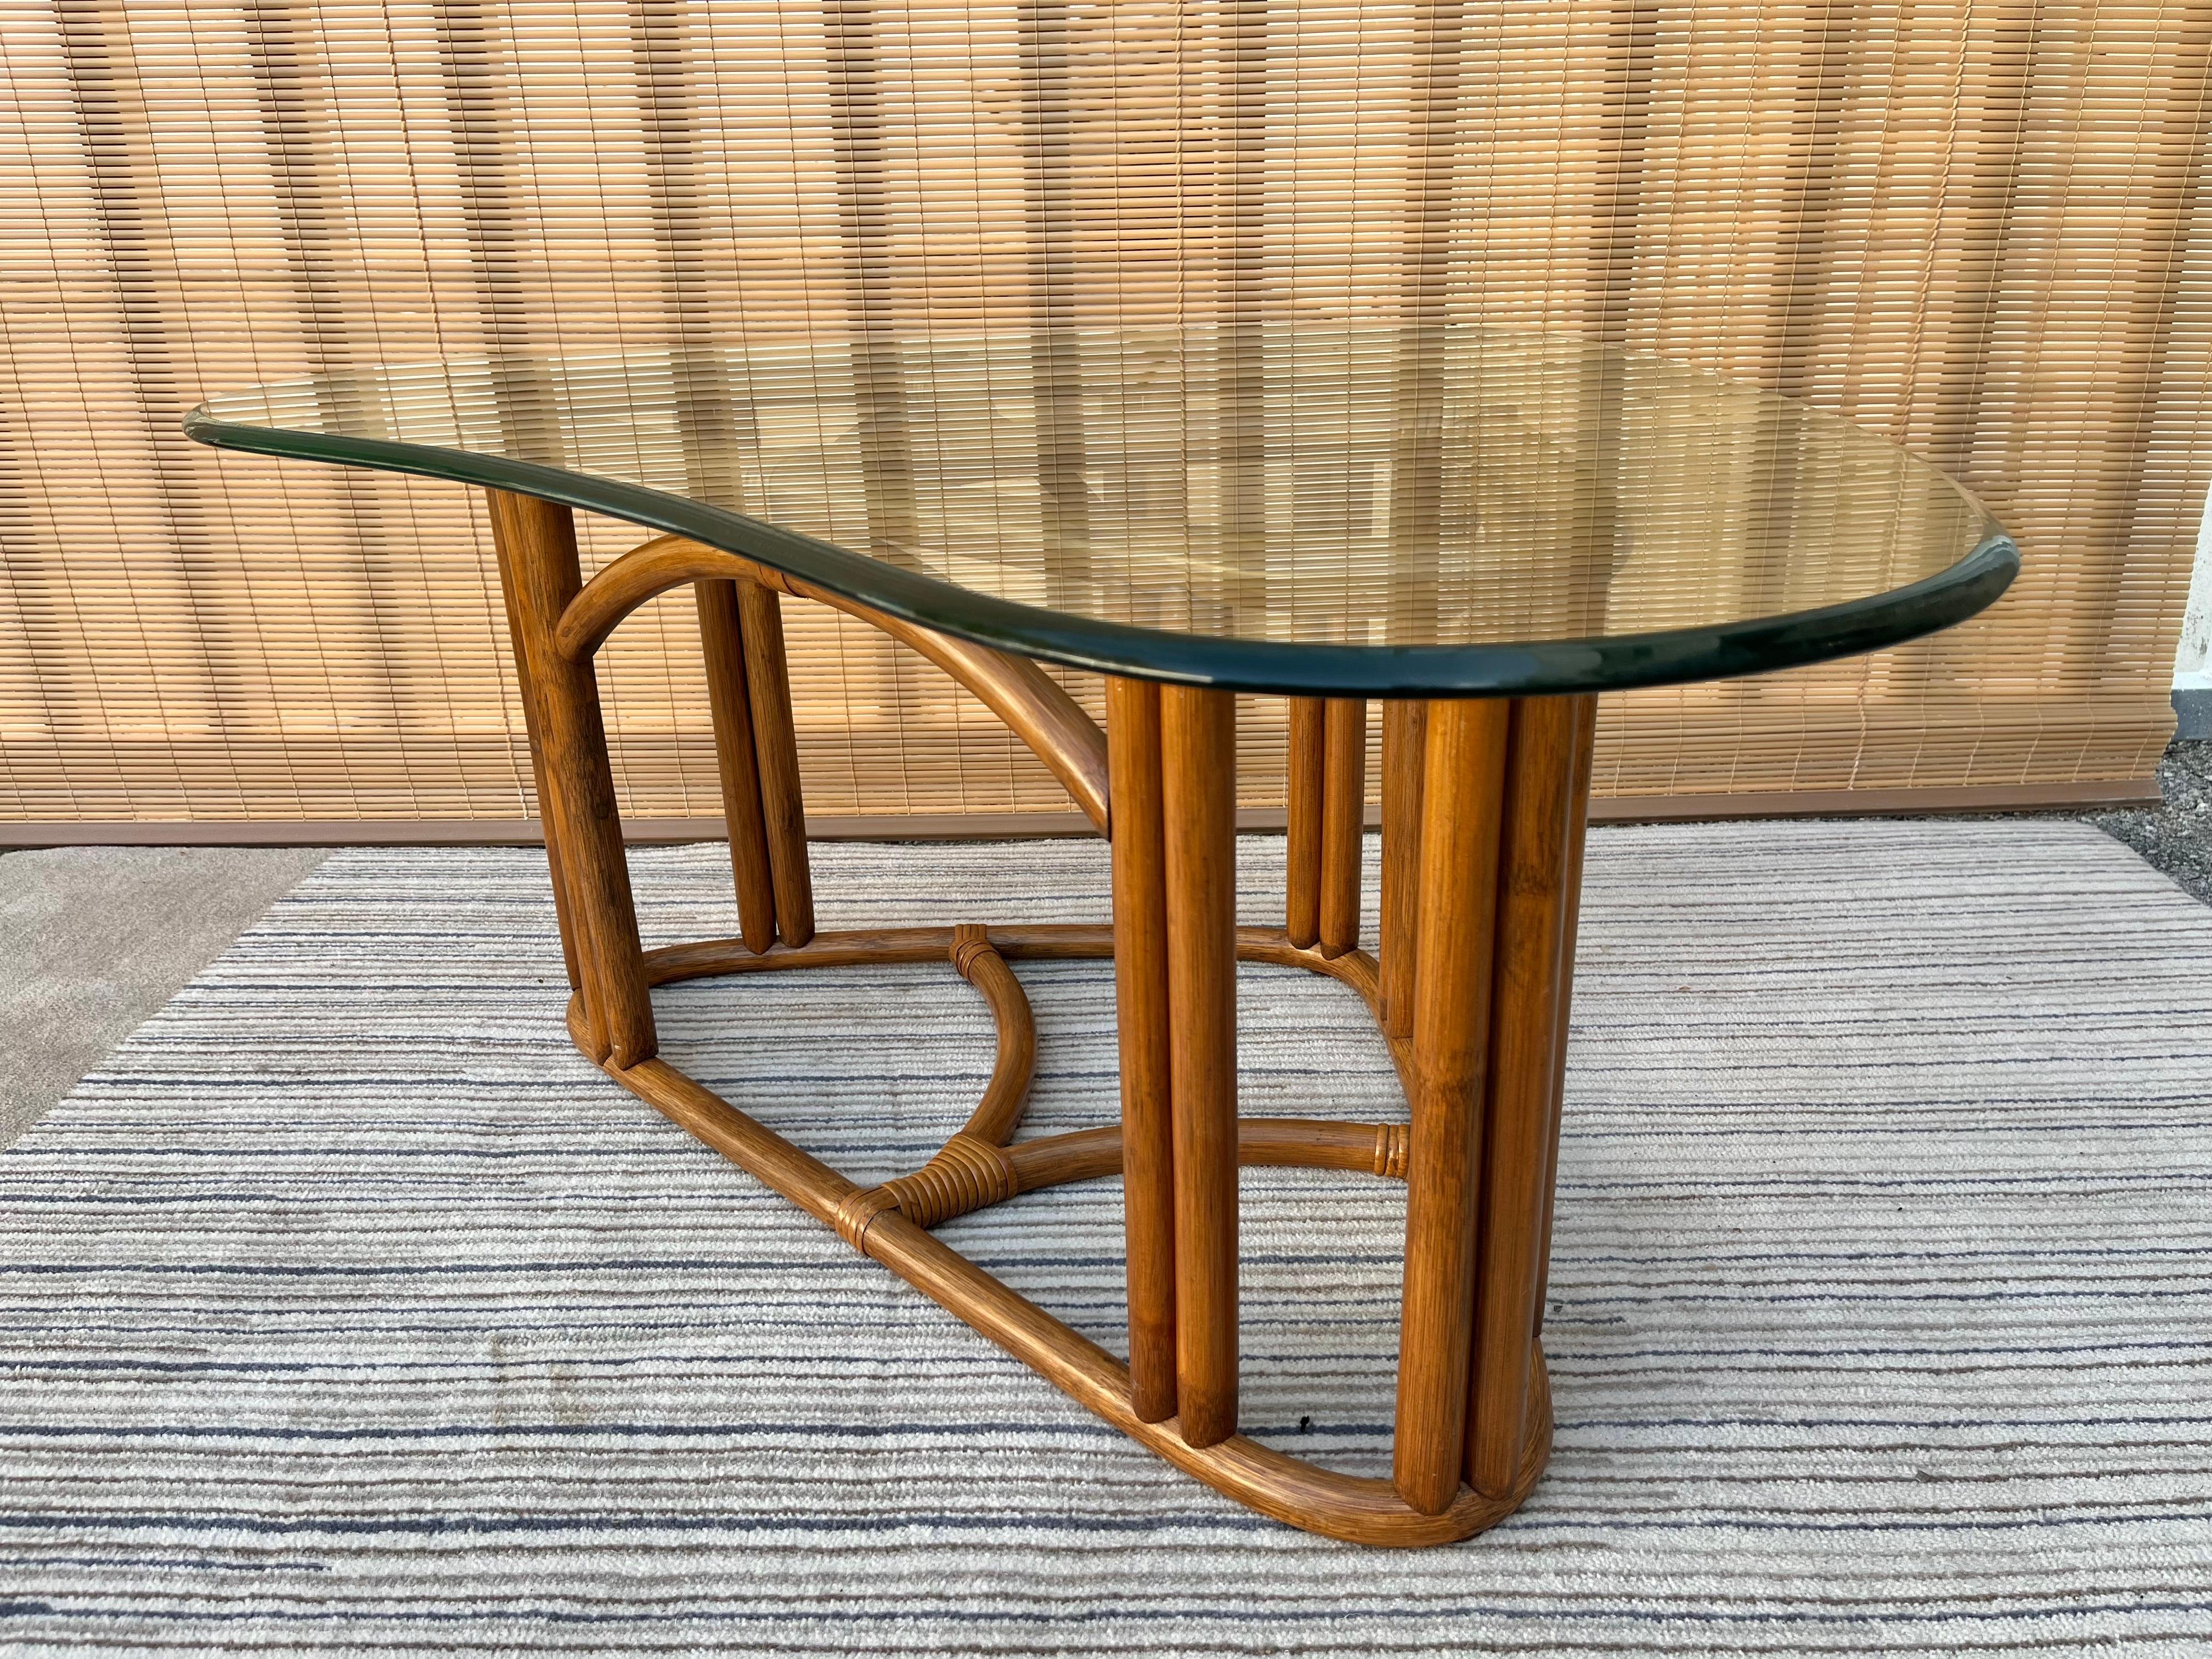 Vintage Mid-Century Modern / coastal style triangular rattan coffee table in the Franco Albini's Style. Circa 1980s.
Features a triangle-shaped rattan and wicker sculptural base with a removable beveled kidney shaped glass top.
In excellent near